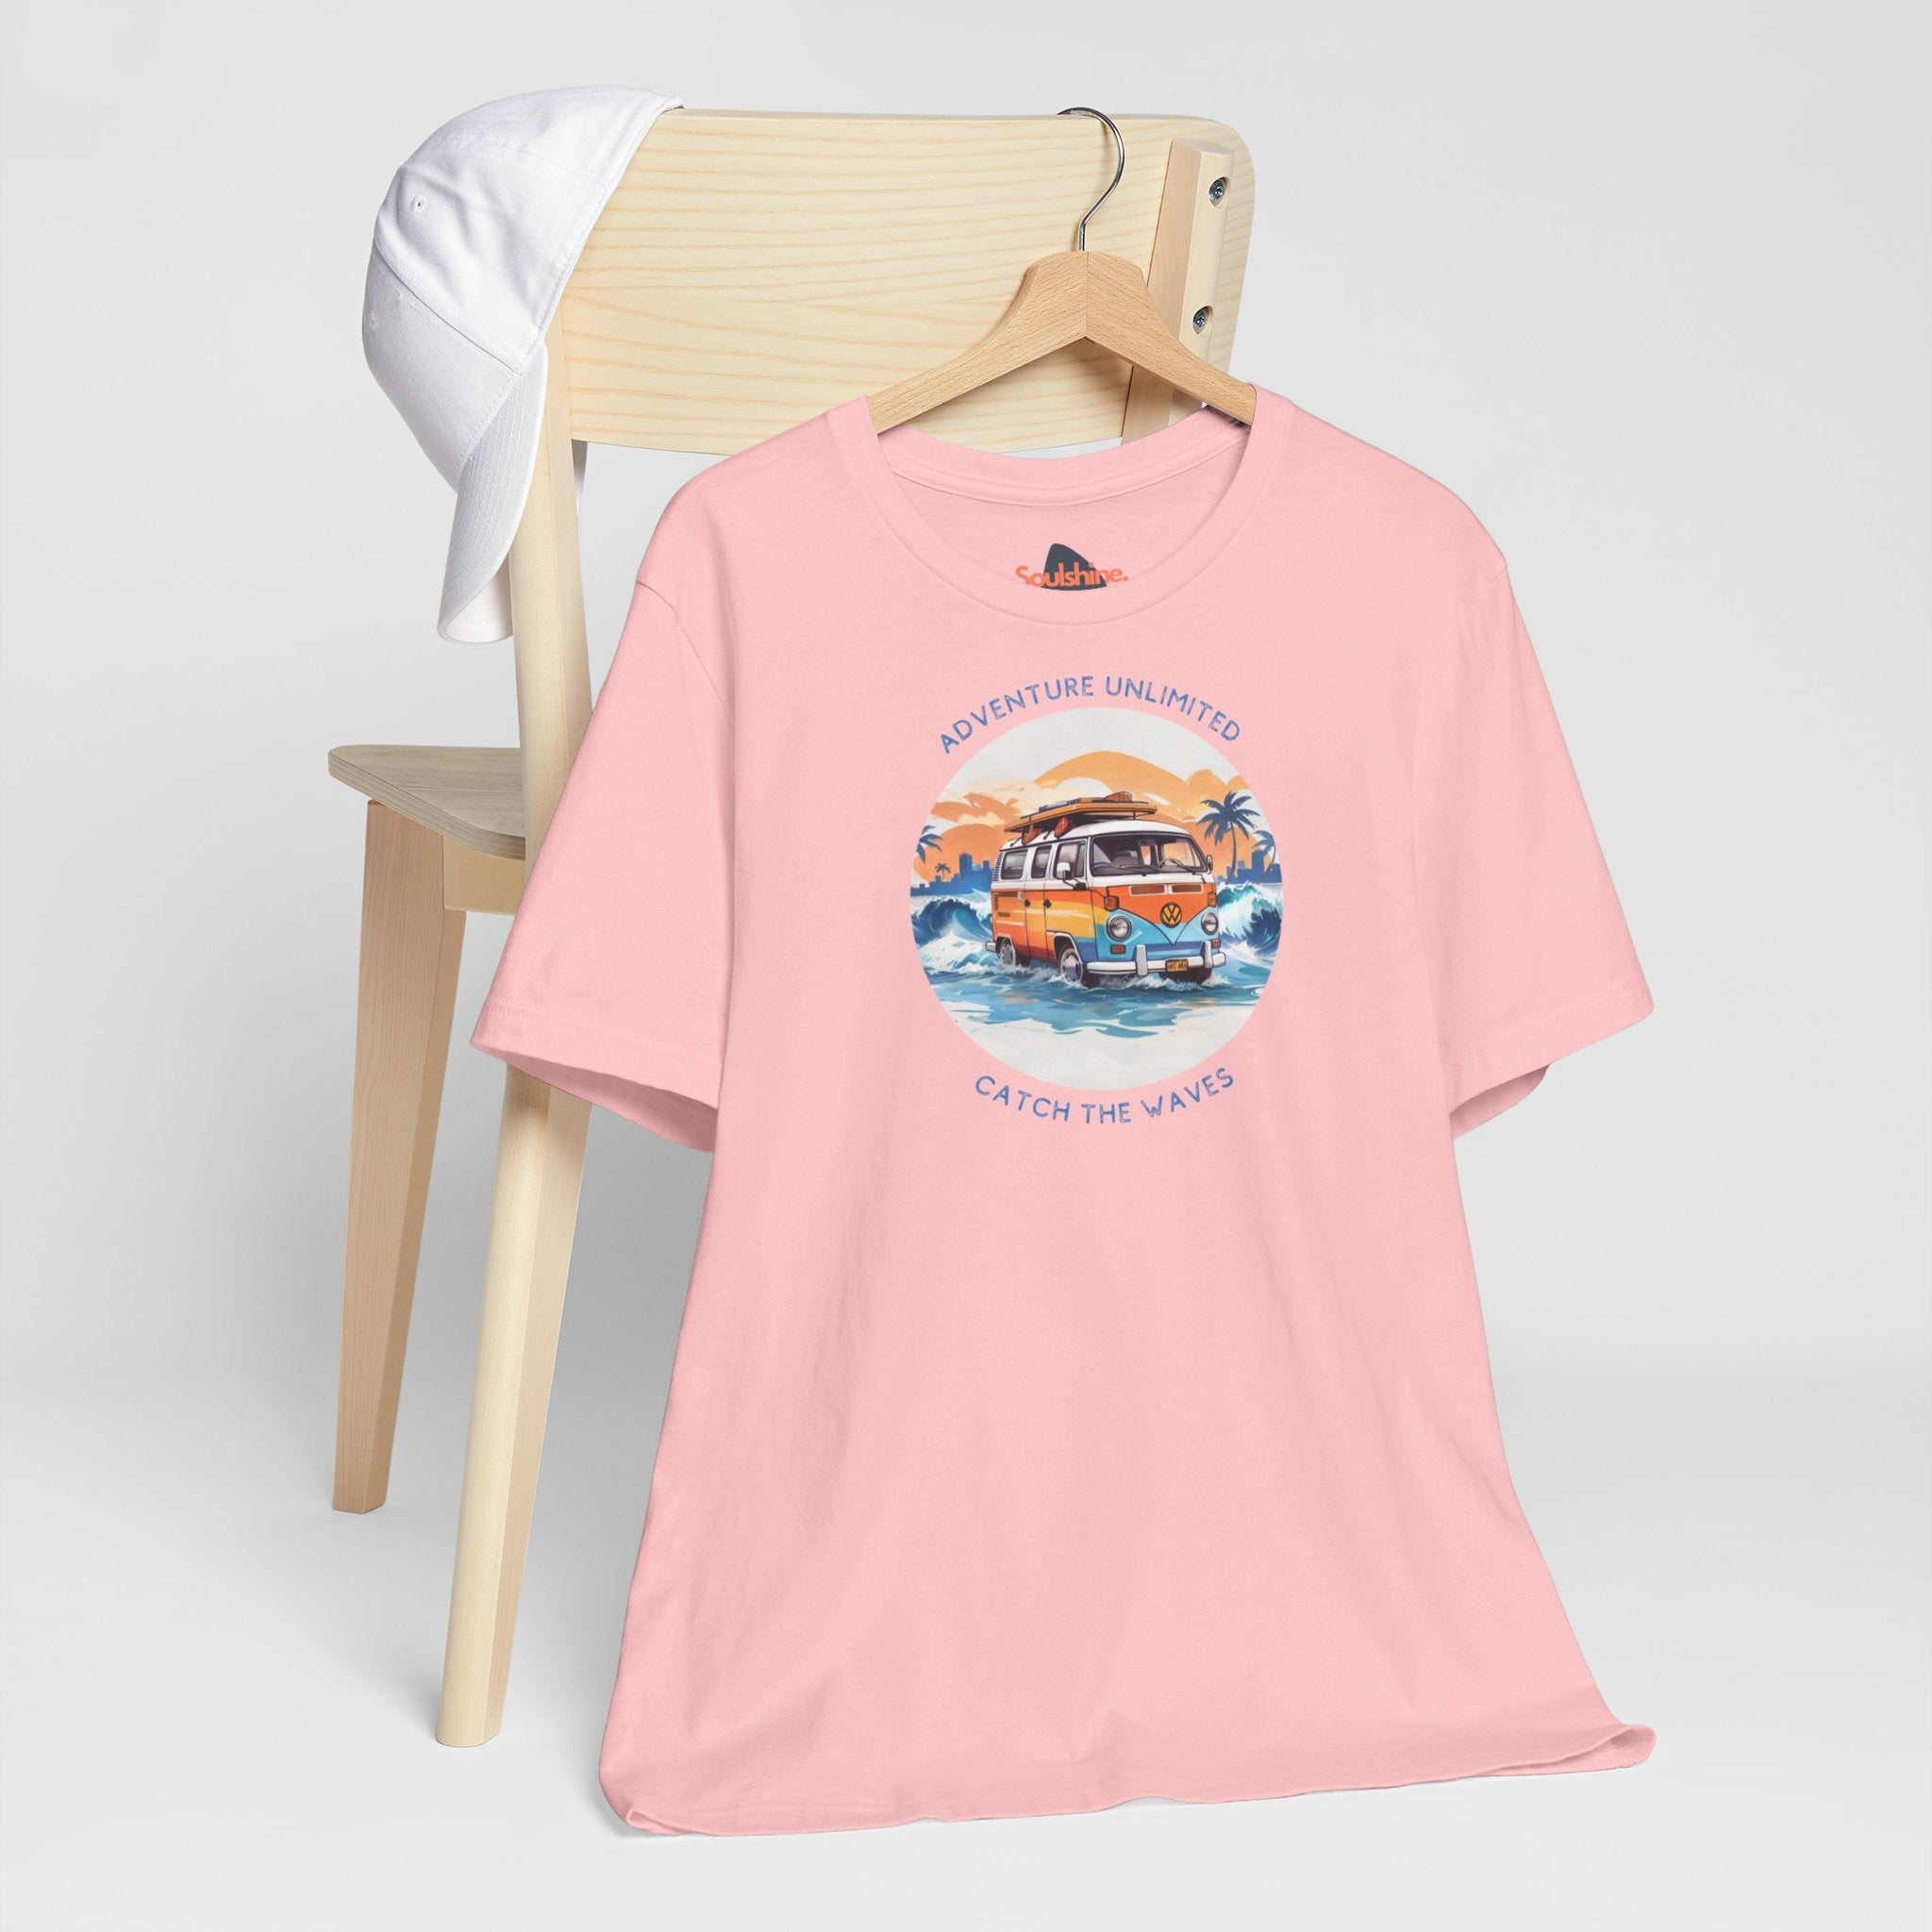 Adventure Unlimited Surfing T-Shirt with Van and Surfboard Graphic - Direct-to-Garment Printed Item